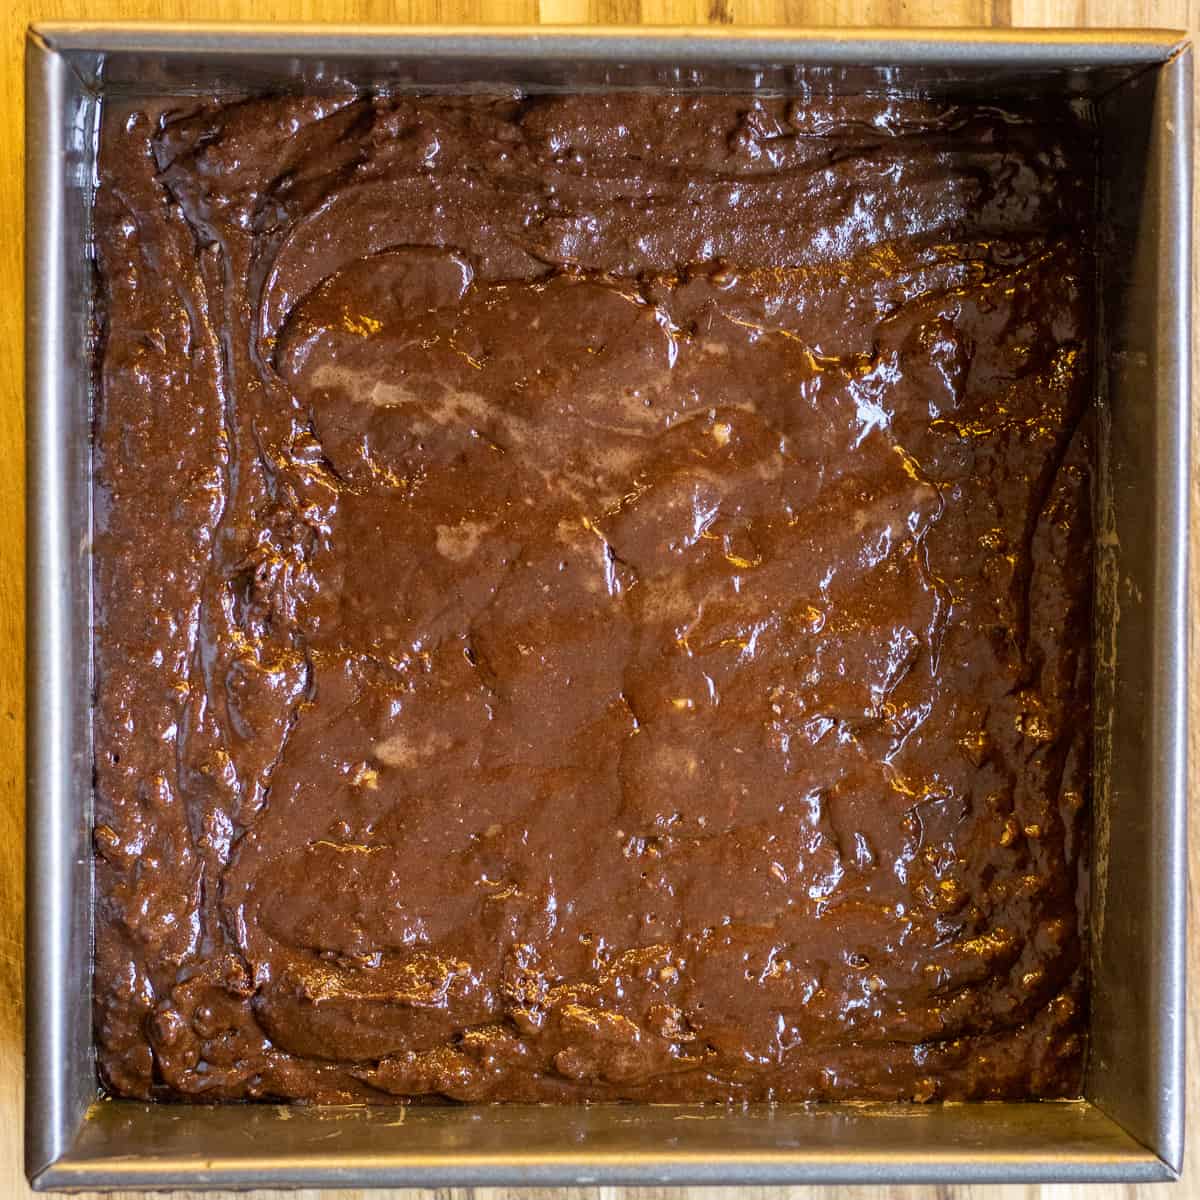 browni batter is spread in a cake pan